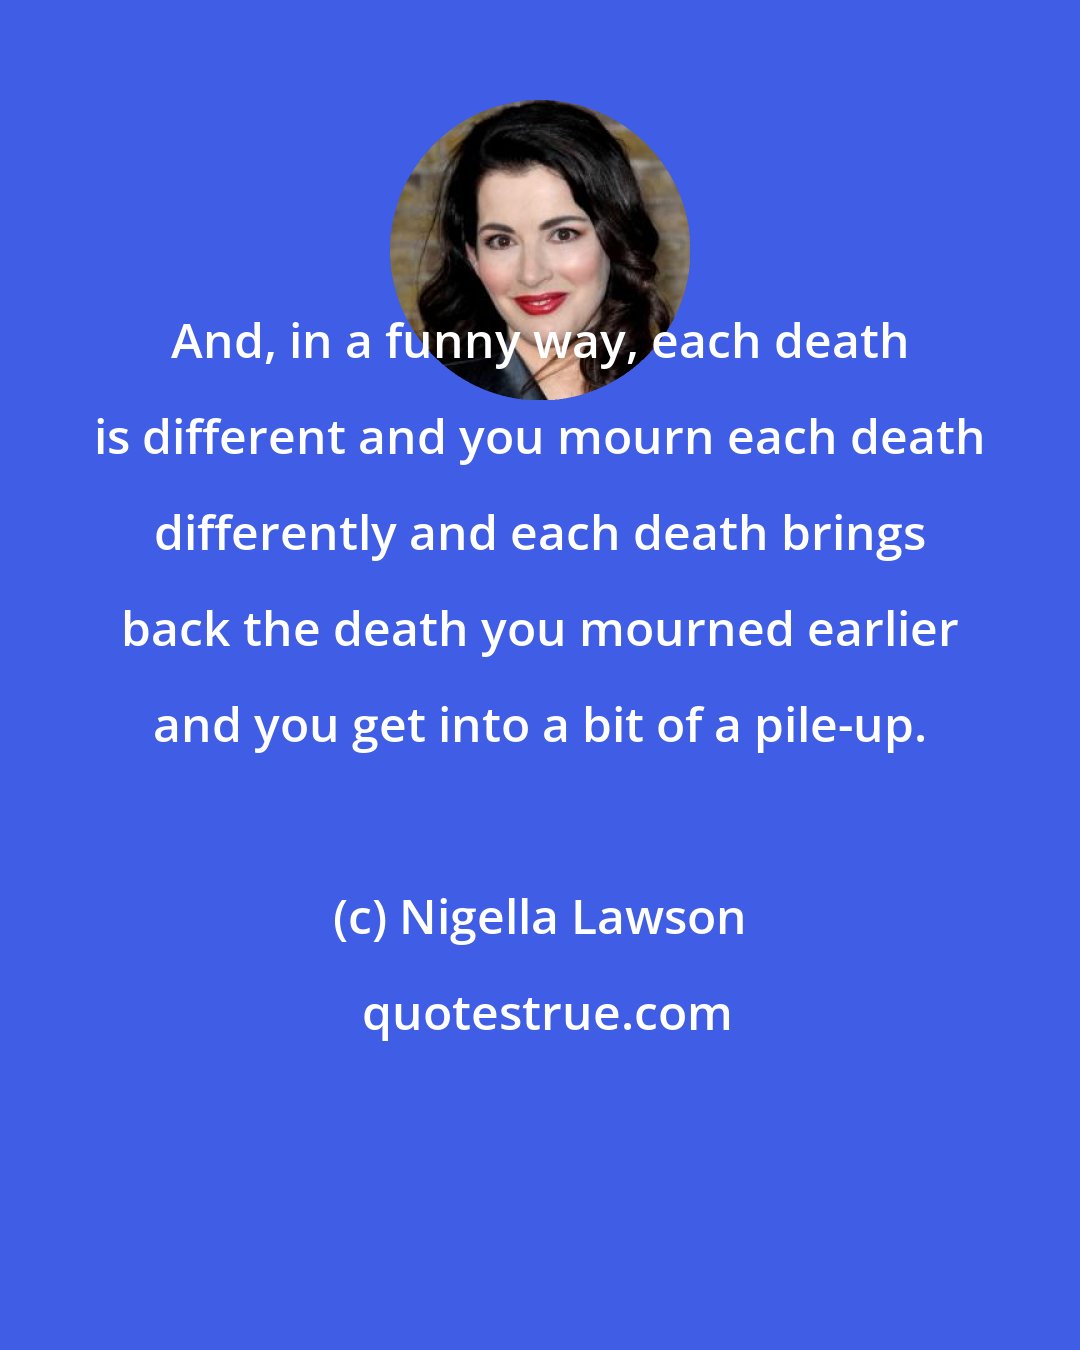 Nigella Lawson: And, in a funny way, each death is different and you mourn each death differently and each death brings back the death you mourned earlier and you get into a bit of a pile-up.